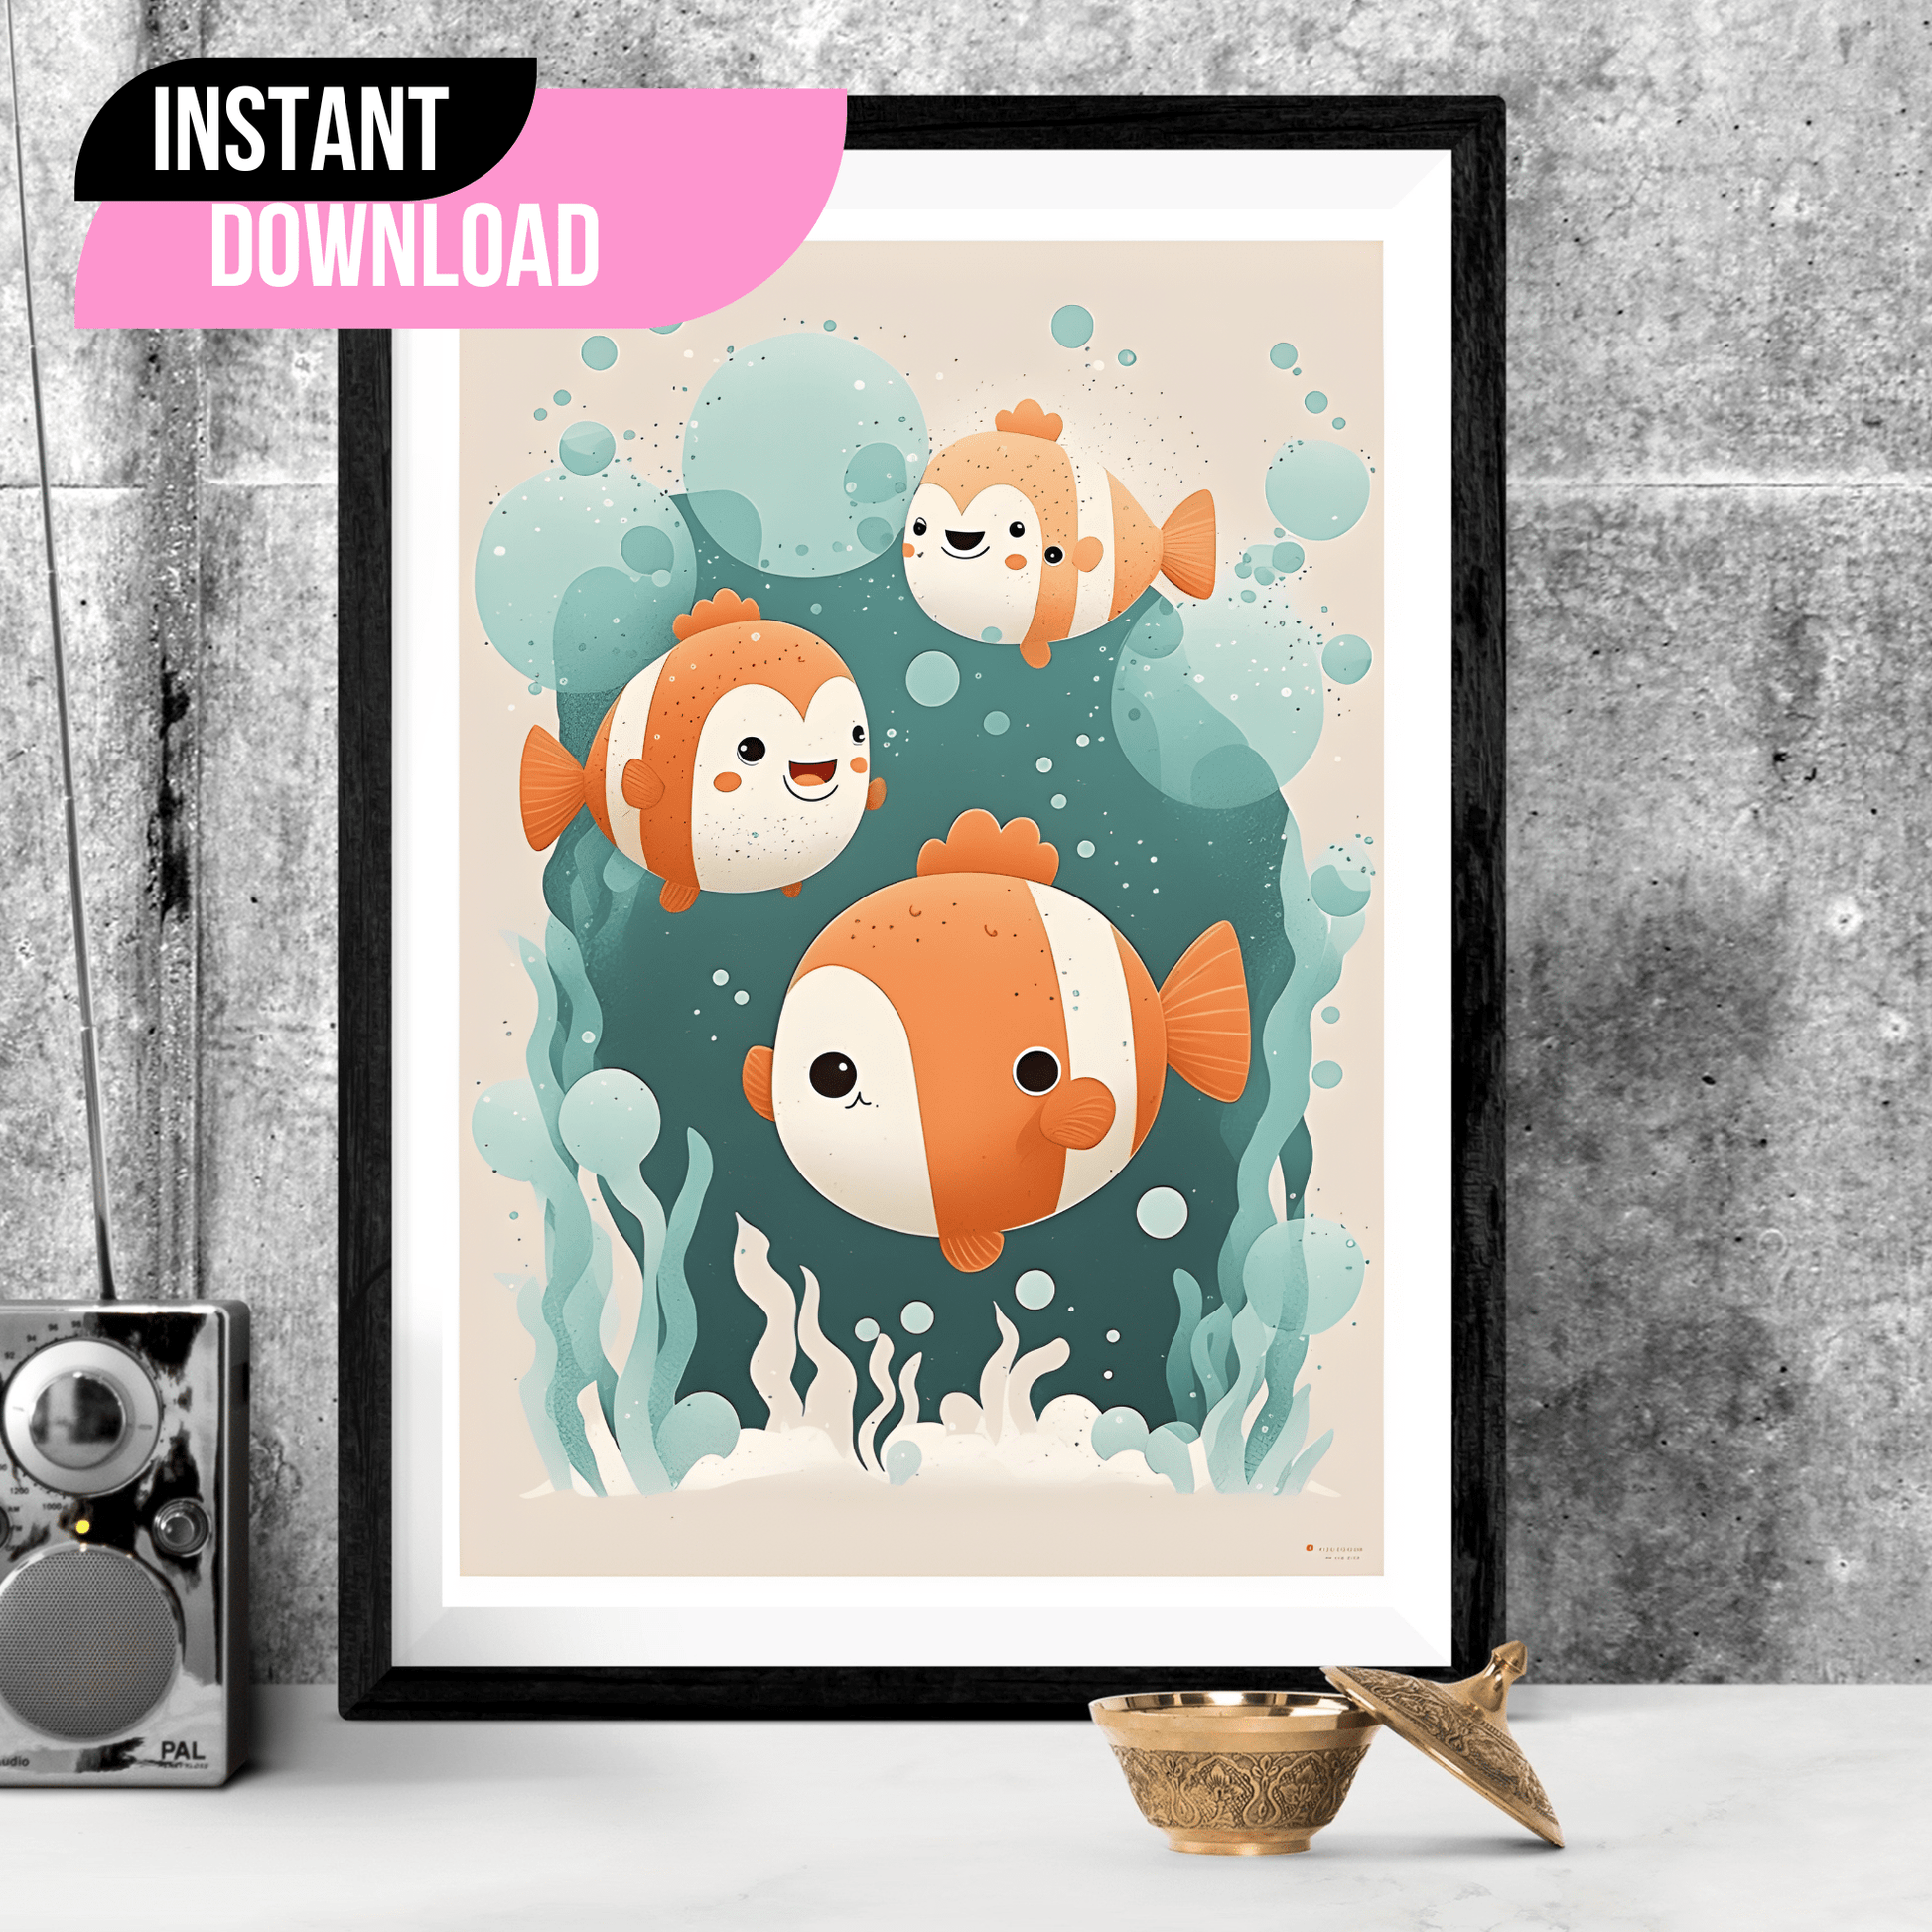 framed poster of a clown fish in teal and orange on a table